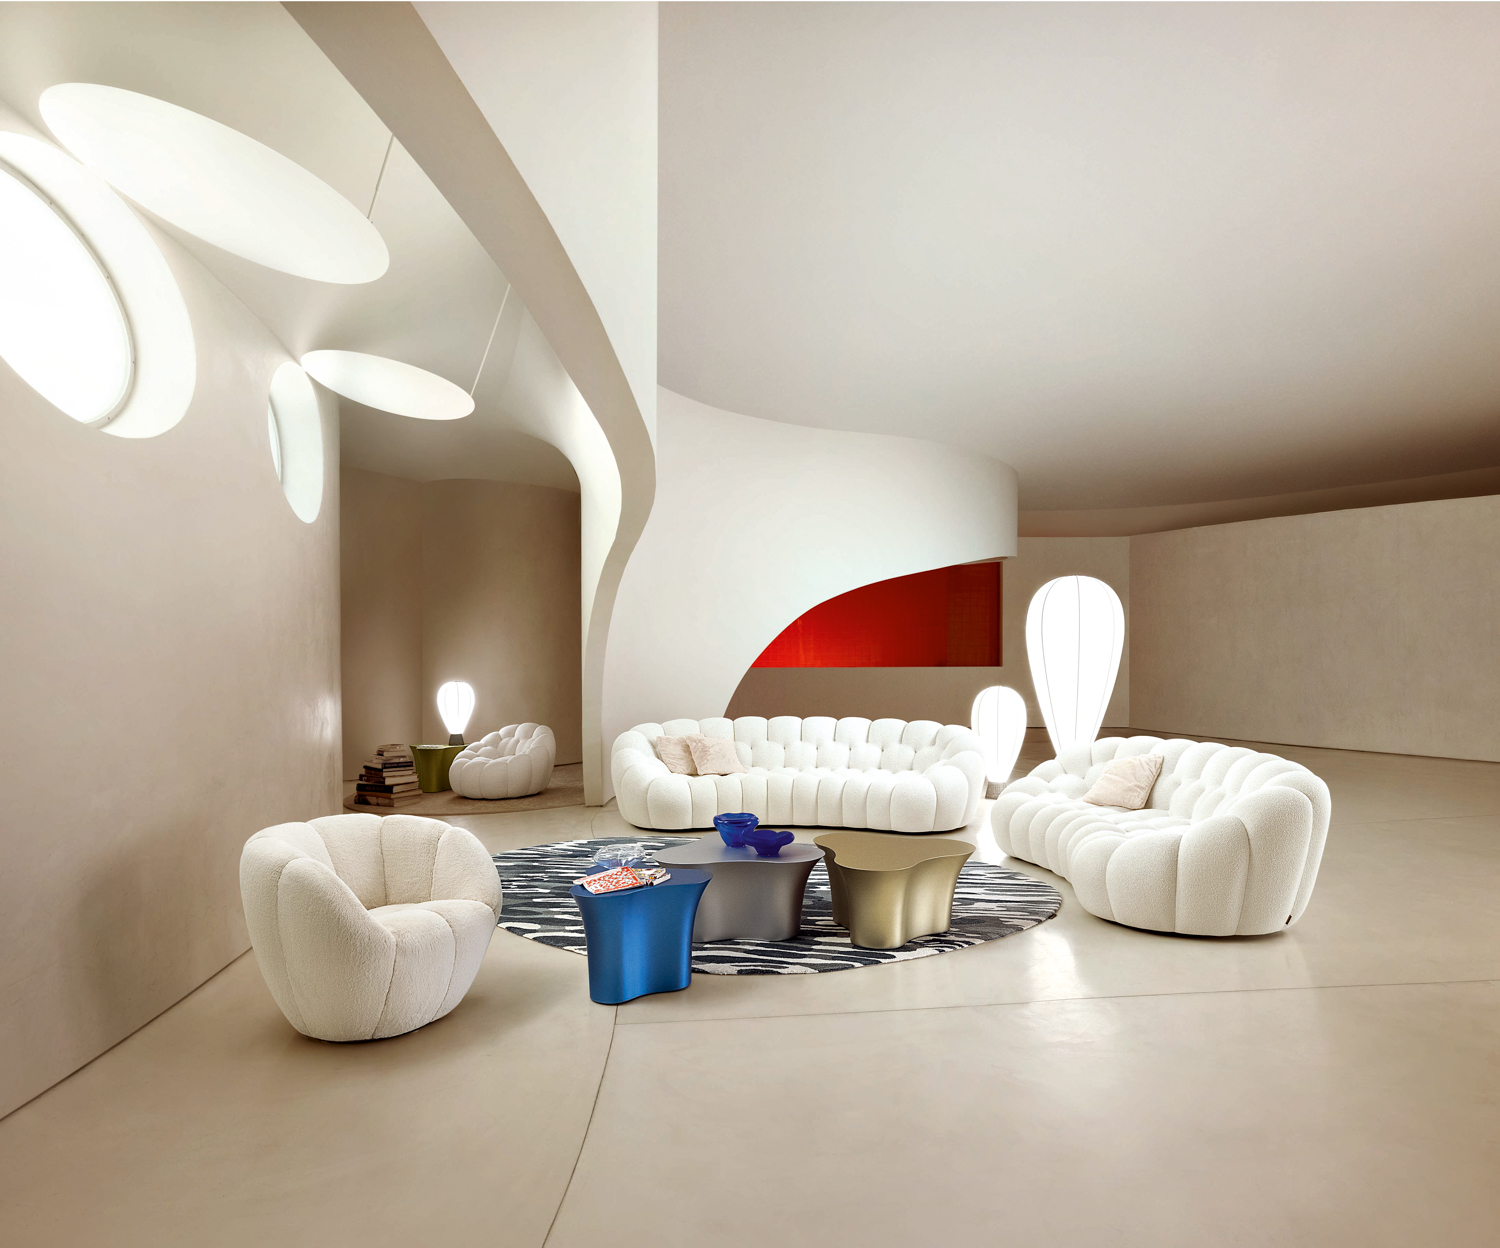 Roche Bobois’ white bubble sofa, loveseat and armchair create seating area in expansive white-toned space